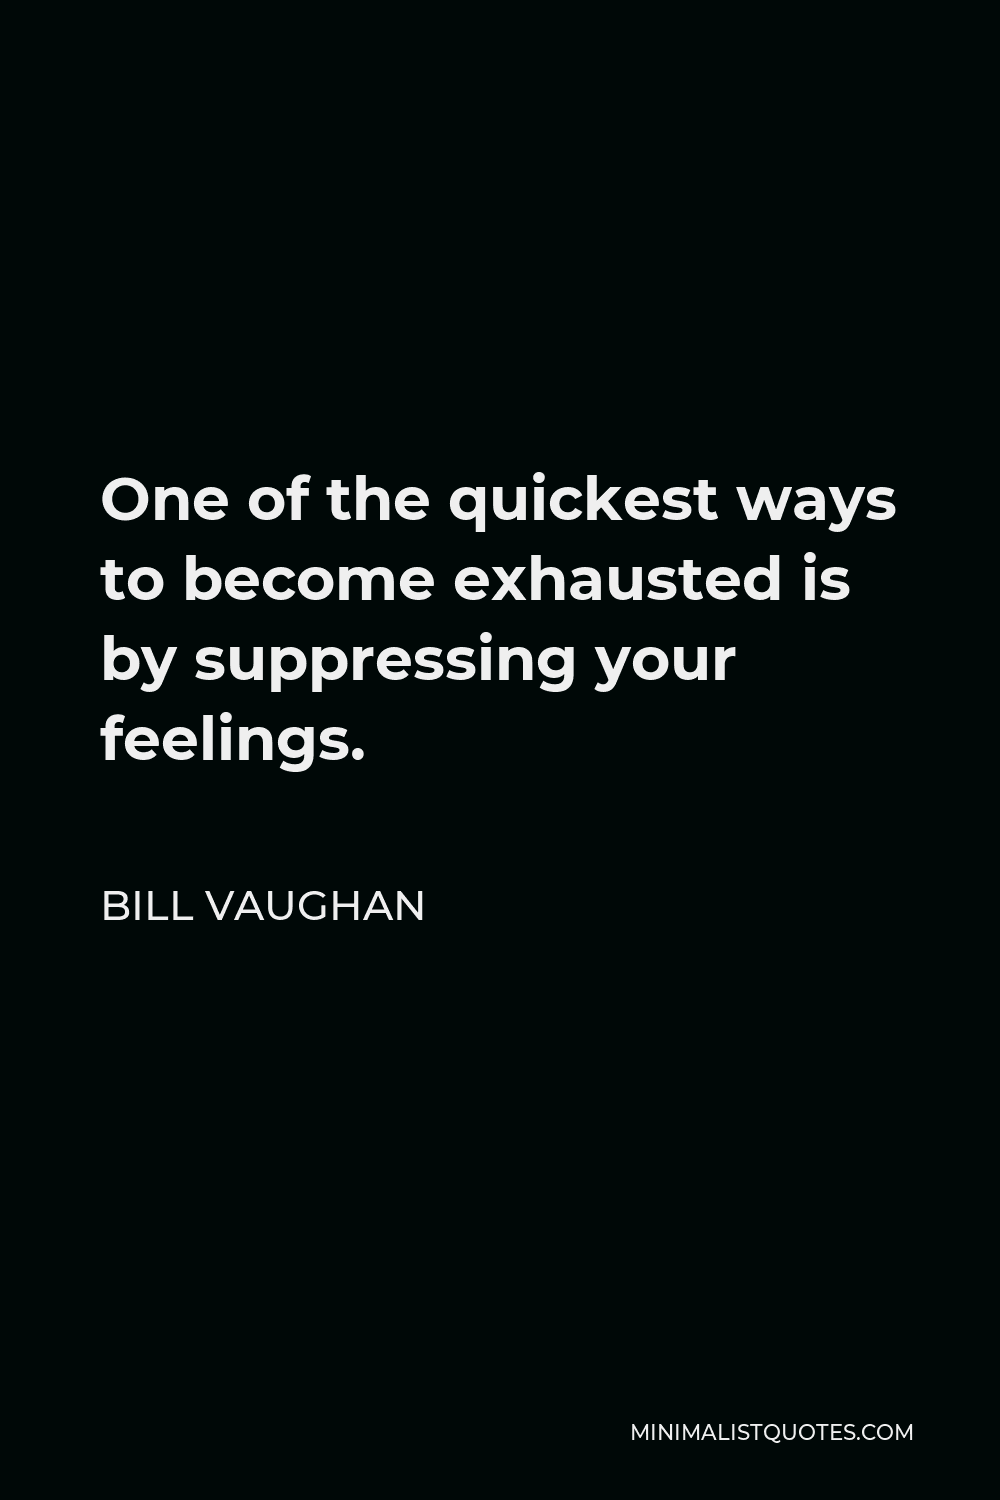 Bill Vaughan Quote - One of the quickest ways to become exhausted is by suppressing your feelings.